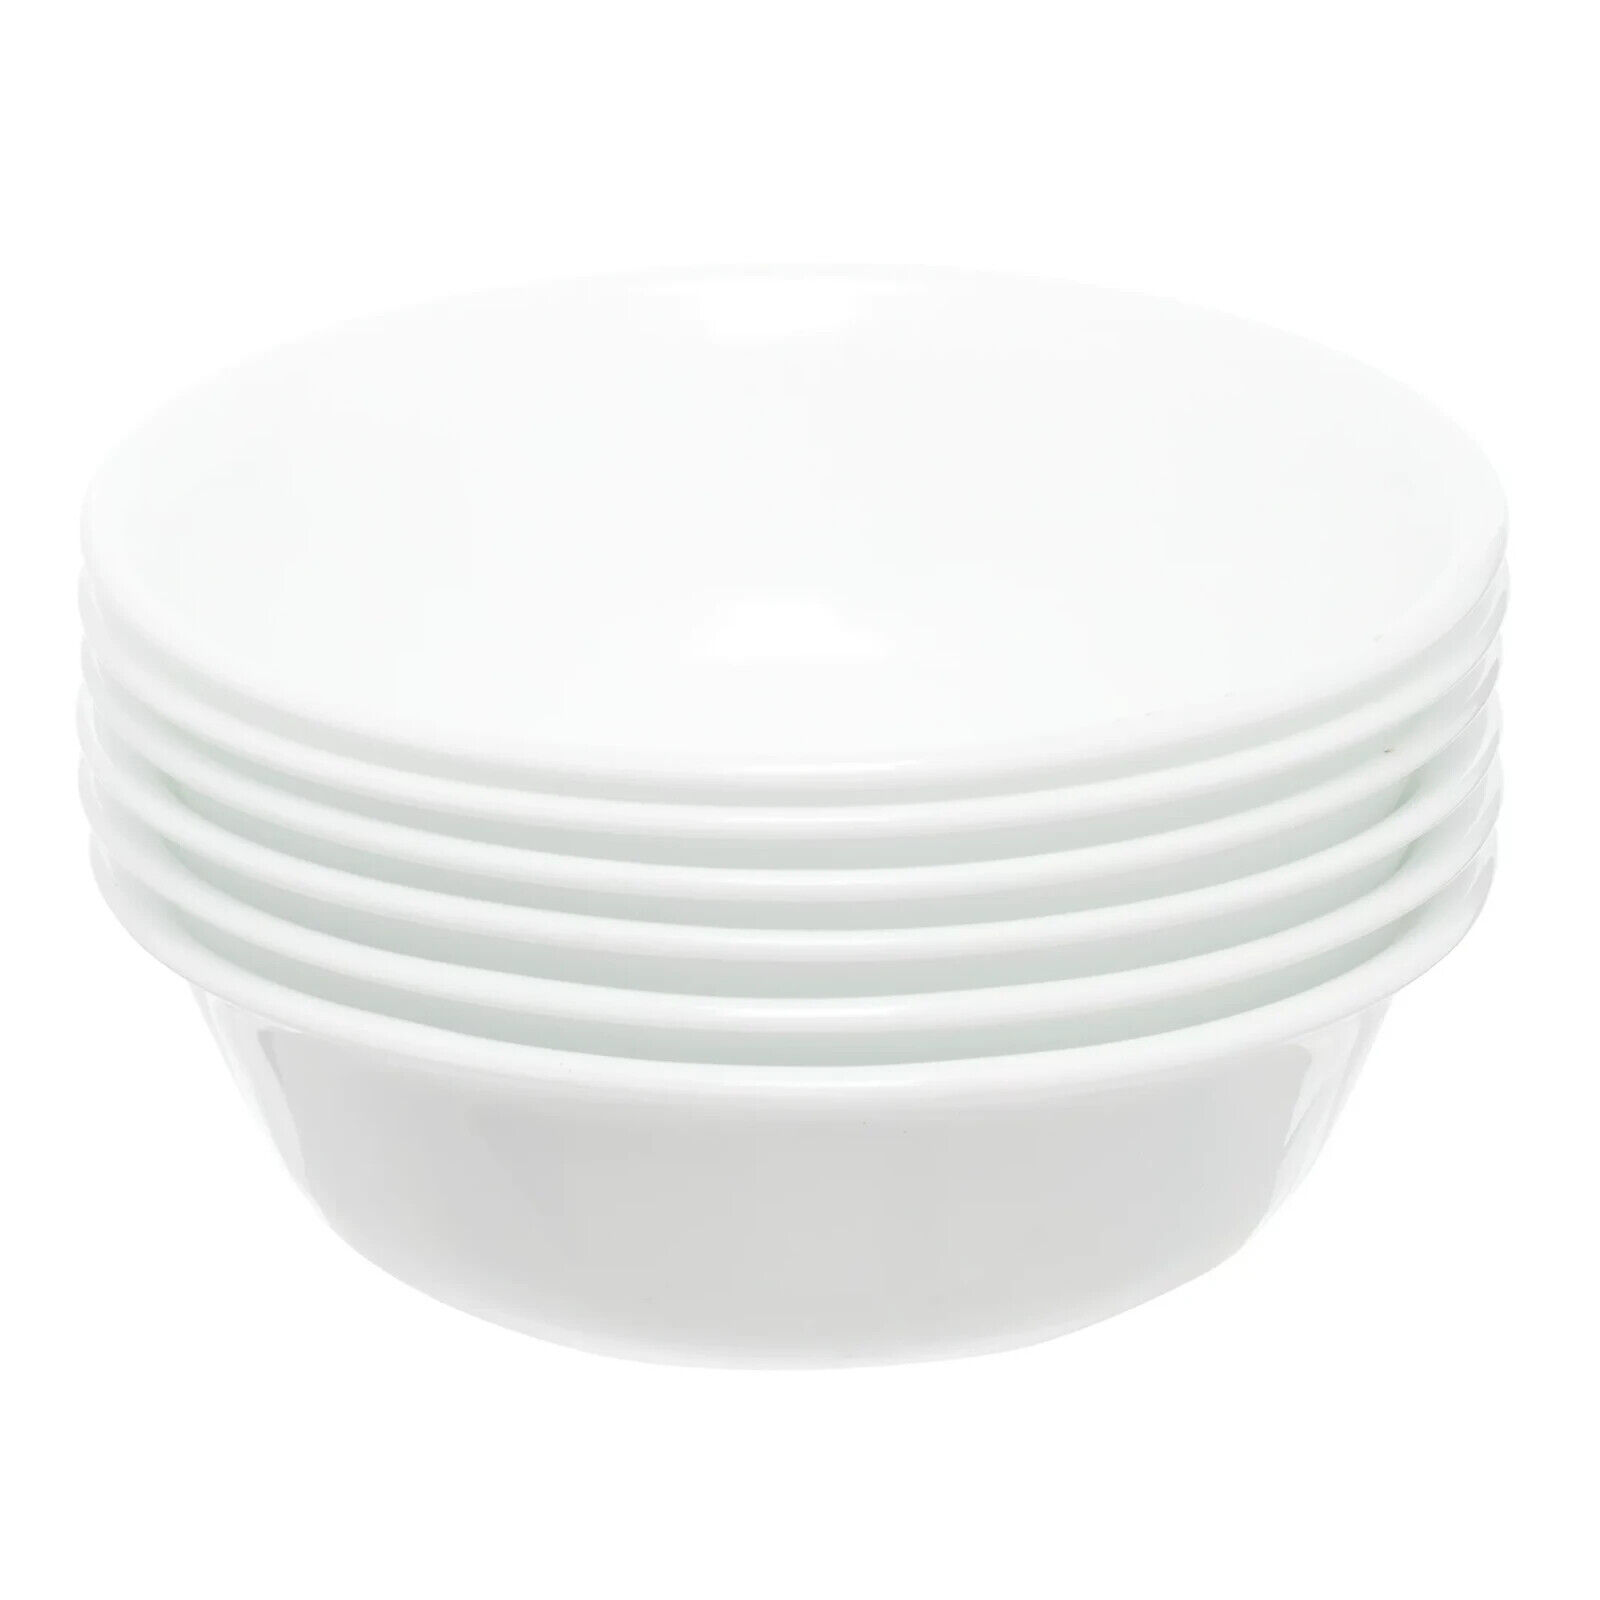 Corelle Classic Winter Frost White, Soup Bowl, Set of 6, 18-oz FREE SHIPPING